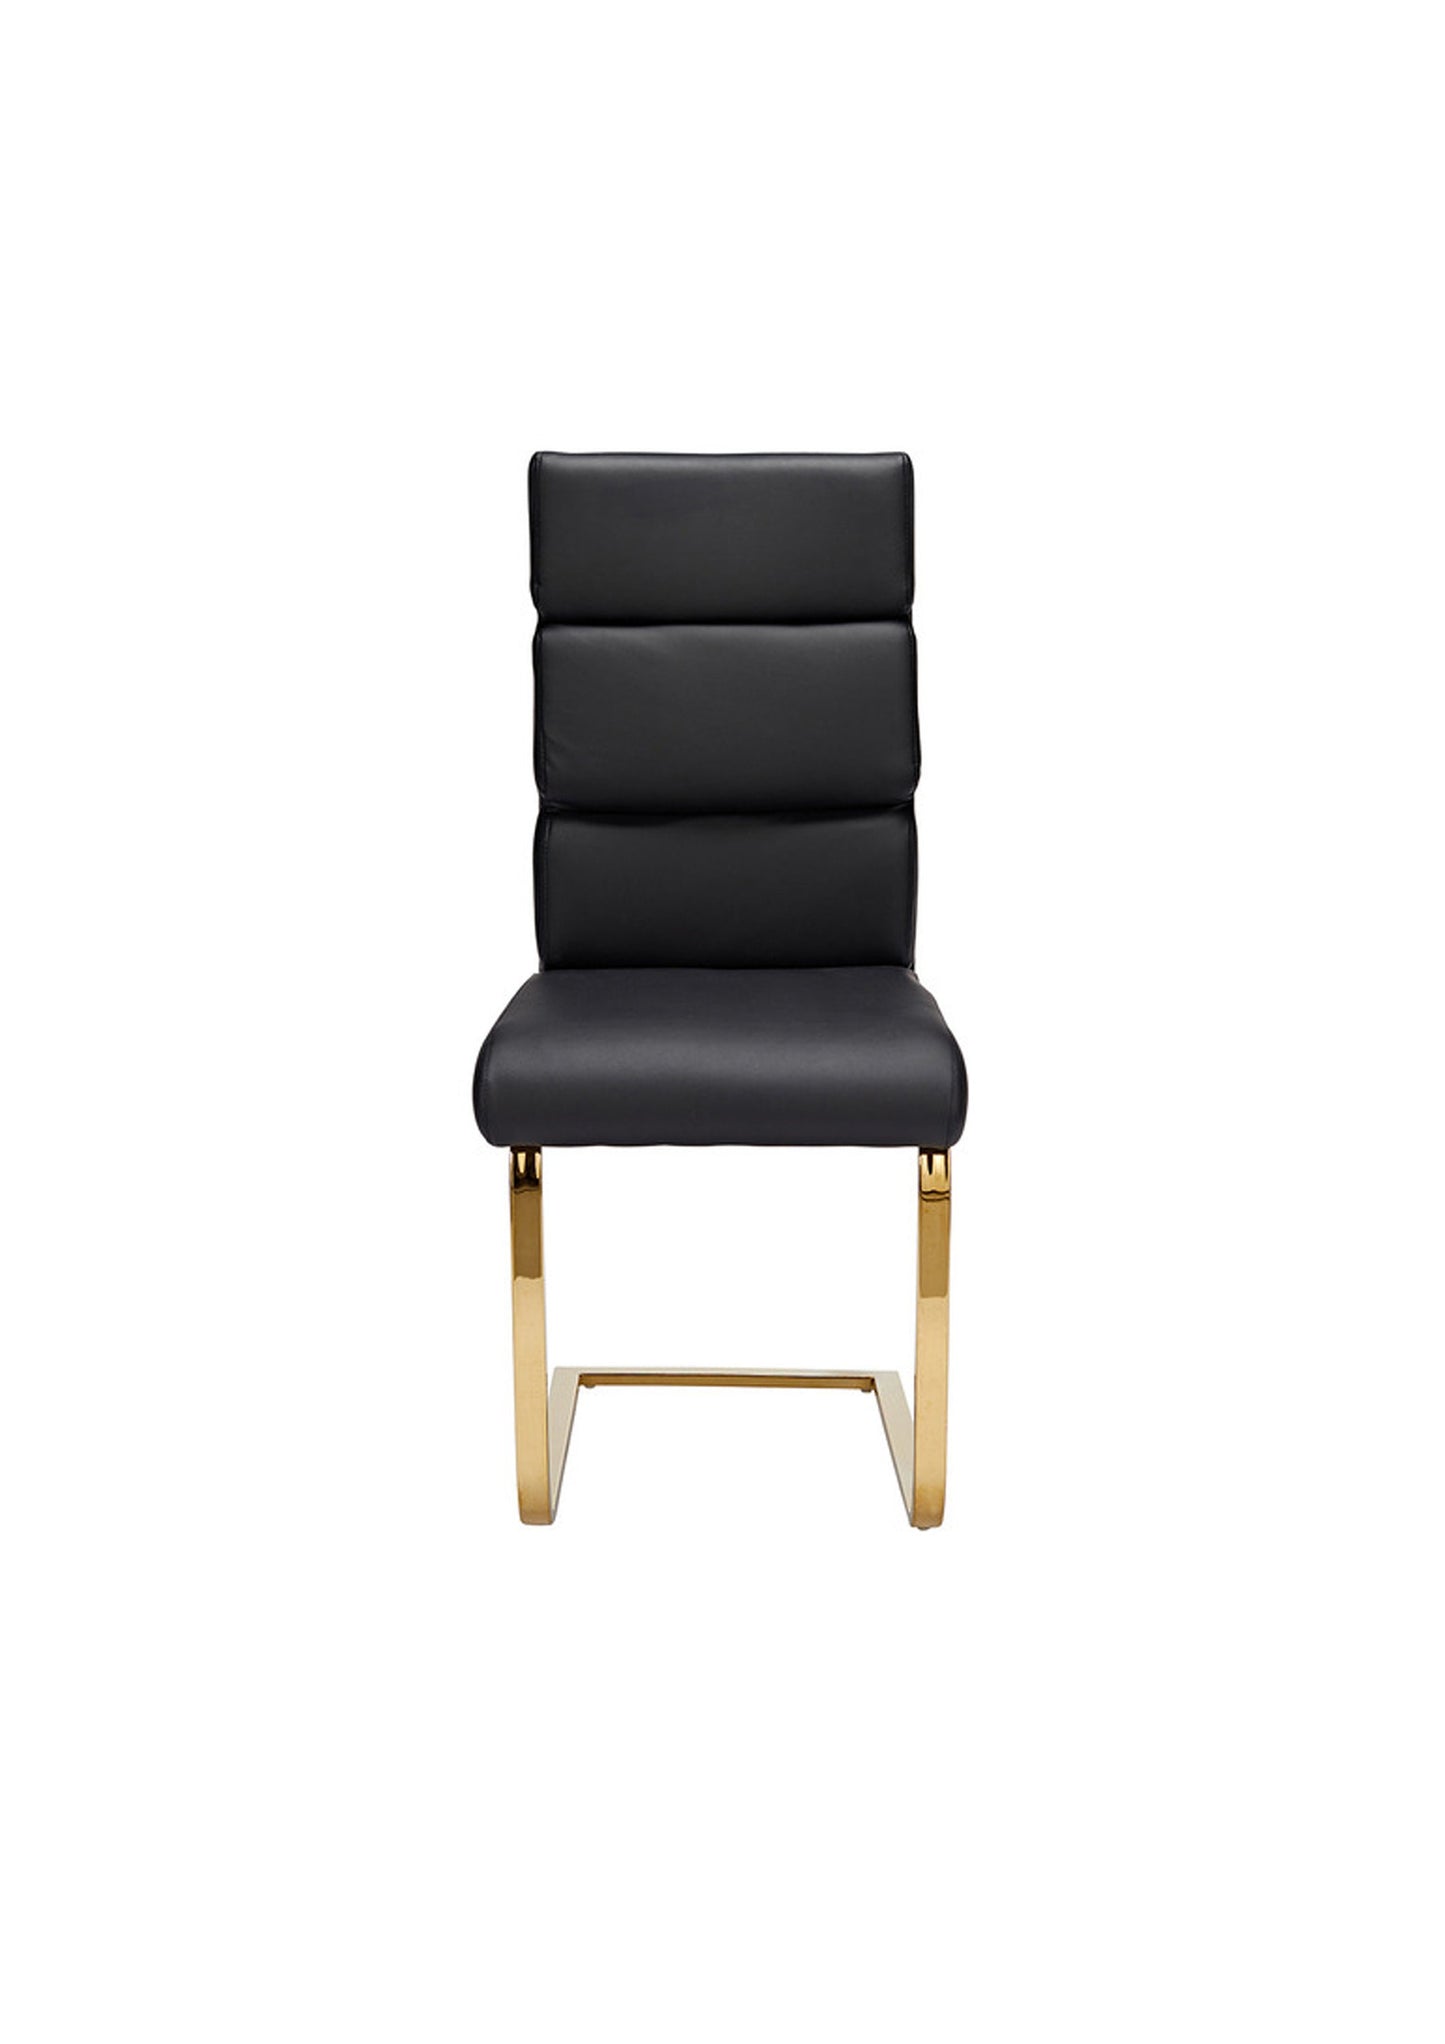 NEW Luxury Stylish Dining / Office chair in Faux Leather White or Black with Gold base - Pack of 2